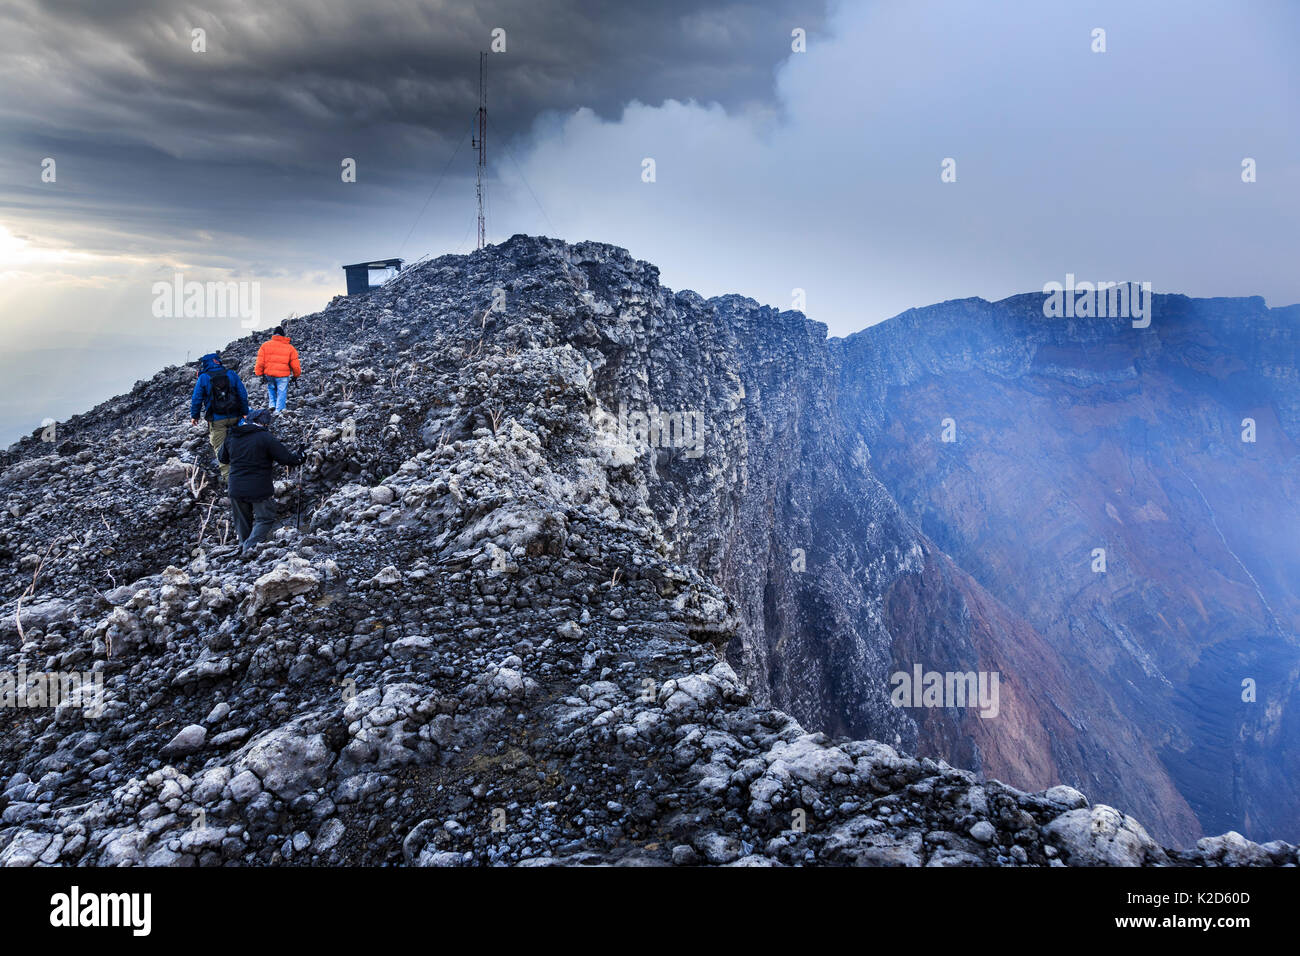 Summit of the Nyiragongo Volcano, scientific monitoring equipment to monitor the gases released from the volcano, and also radio equipment for communication. Near the crater. North Kivu Province, Democratic Republic of Congo. September 2015. Stock Photo